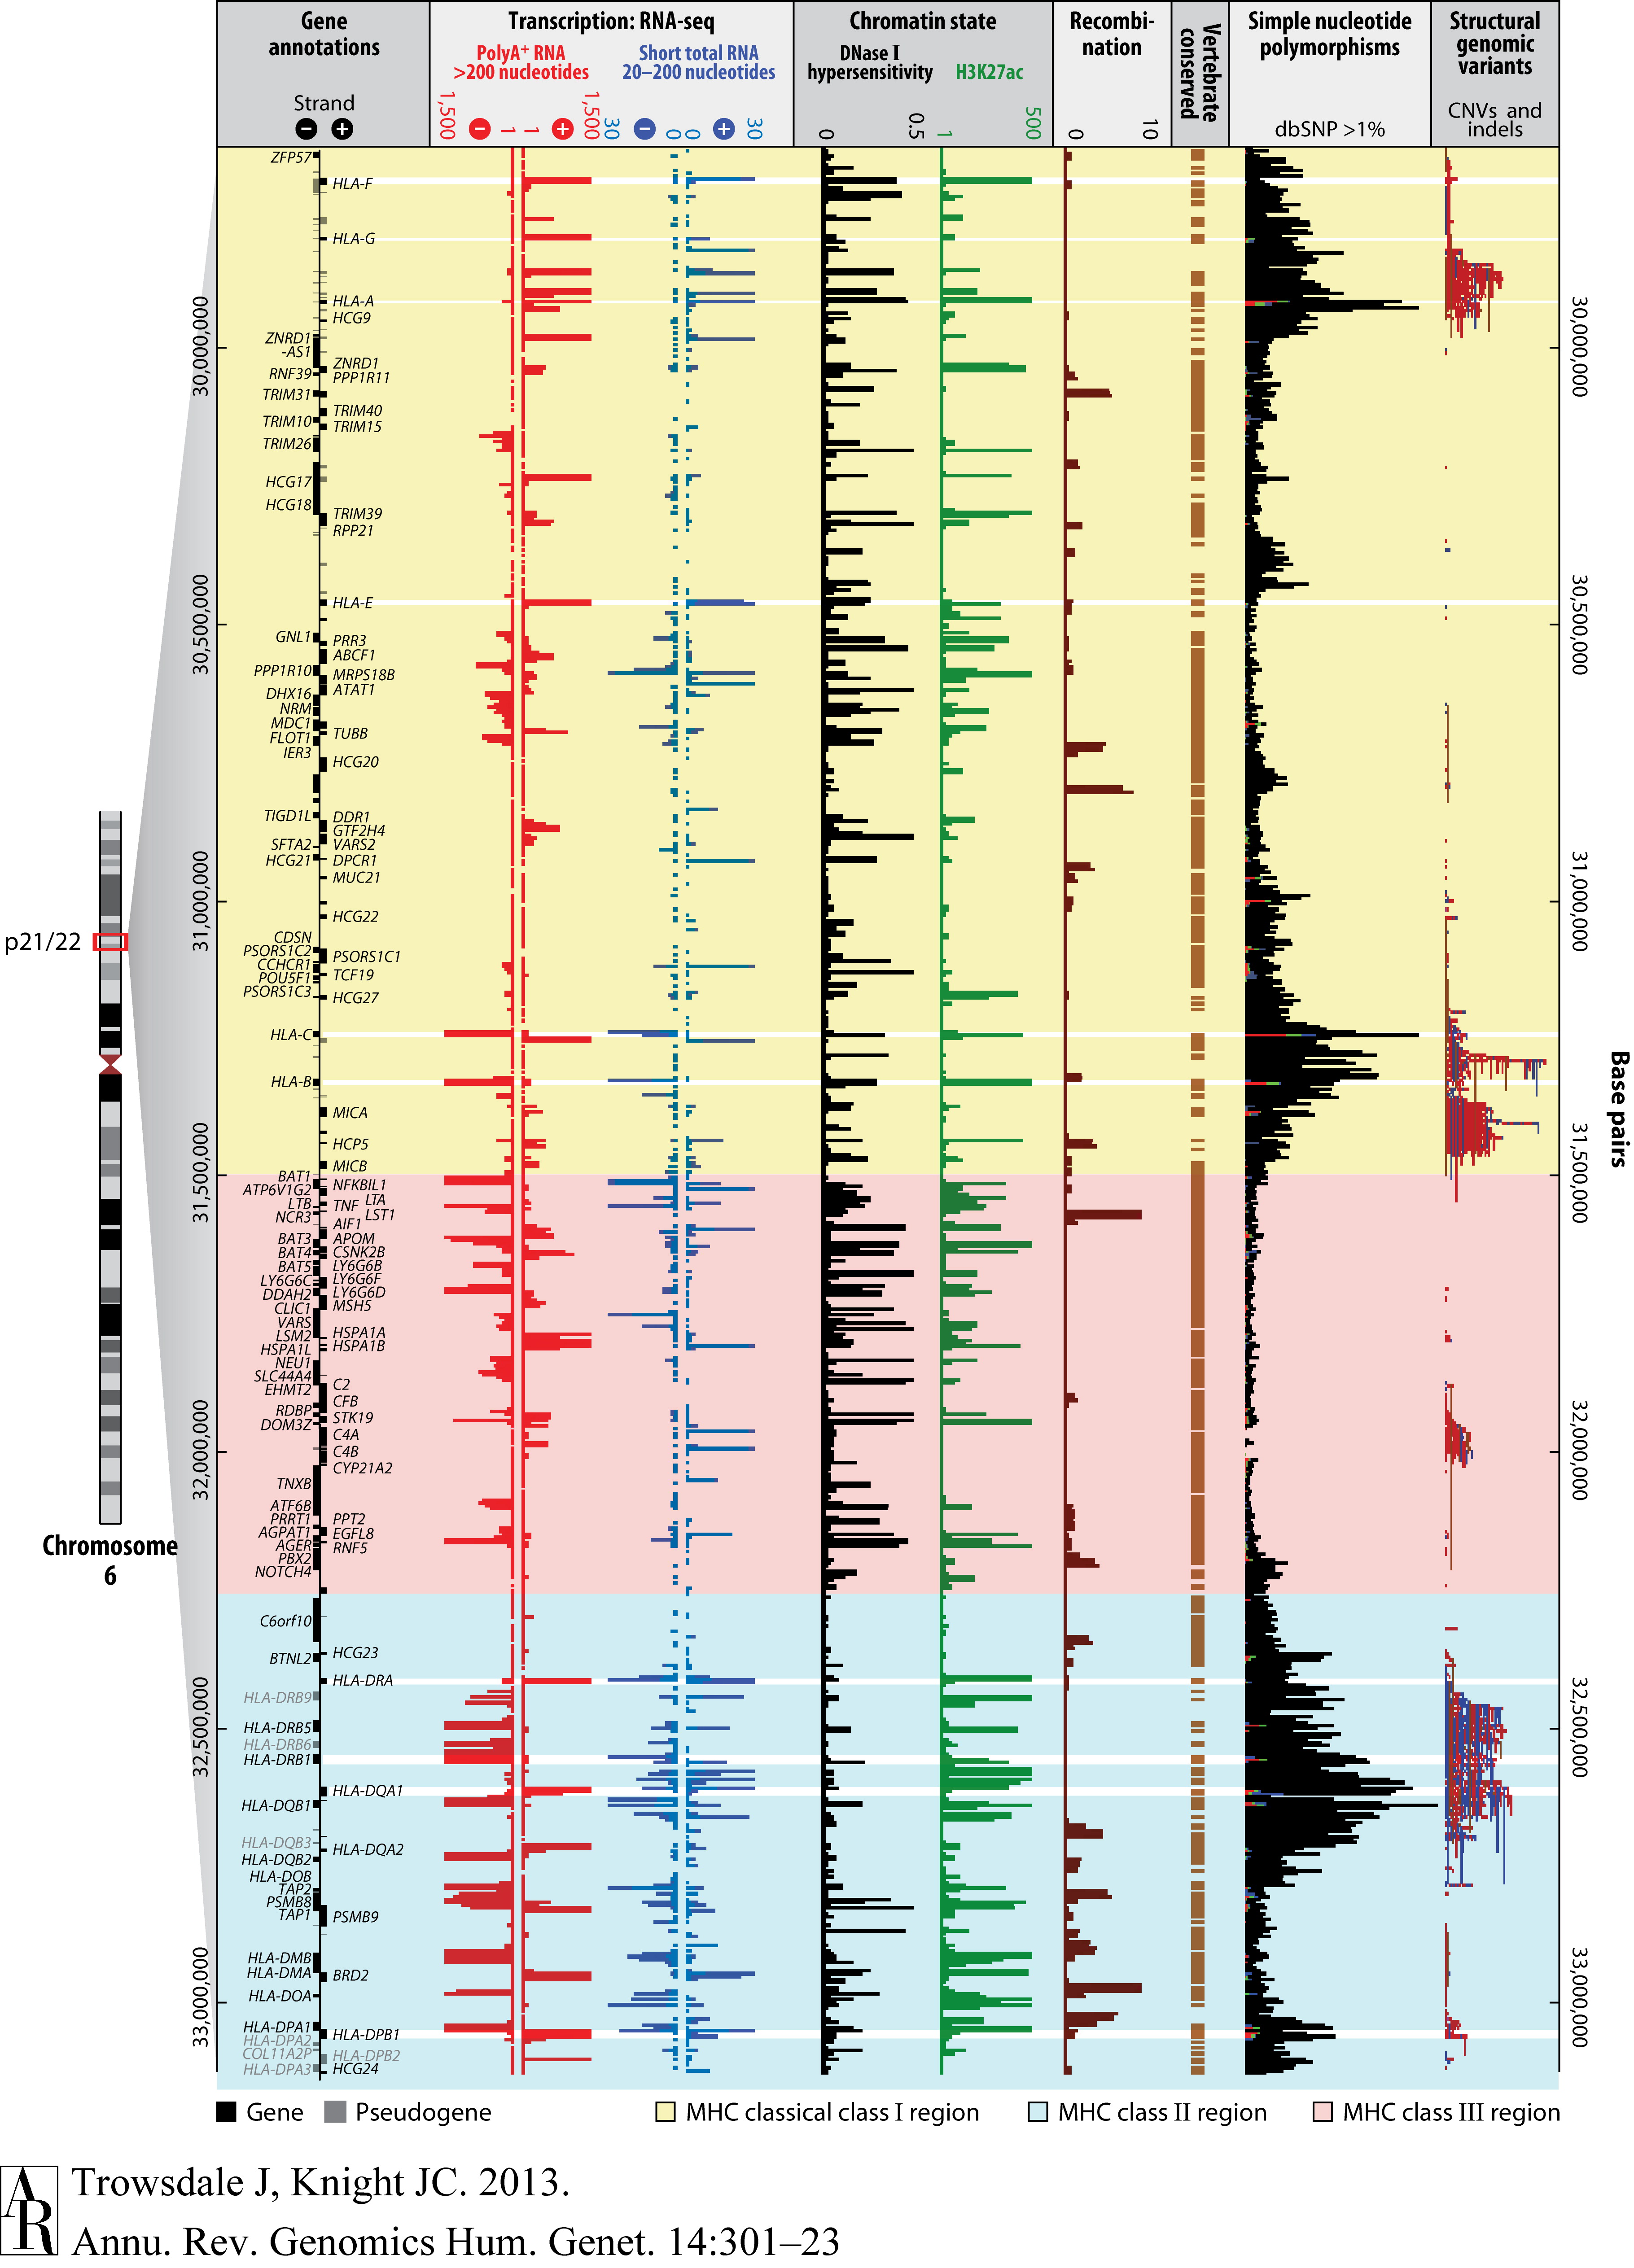 Genomic landscape of the MHC [Trowsdale and Knight, 2013](https://doi.org/10.1146/annurev-genom-091212-153455)